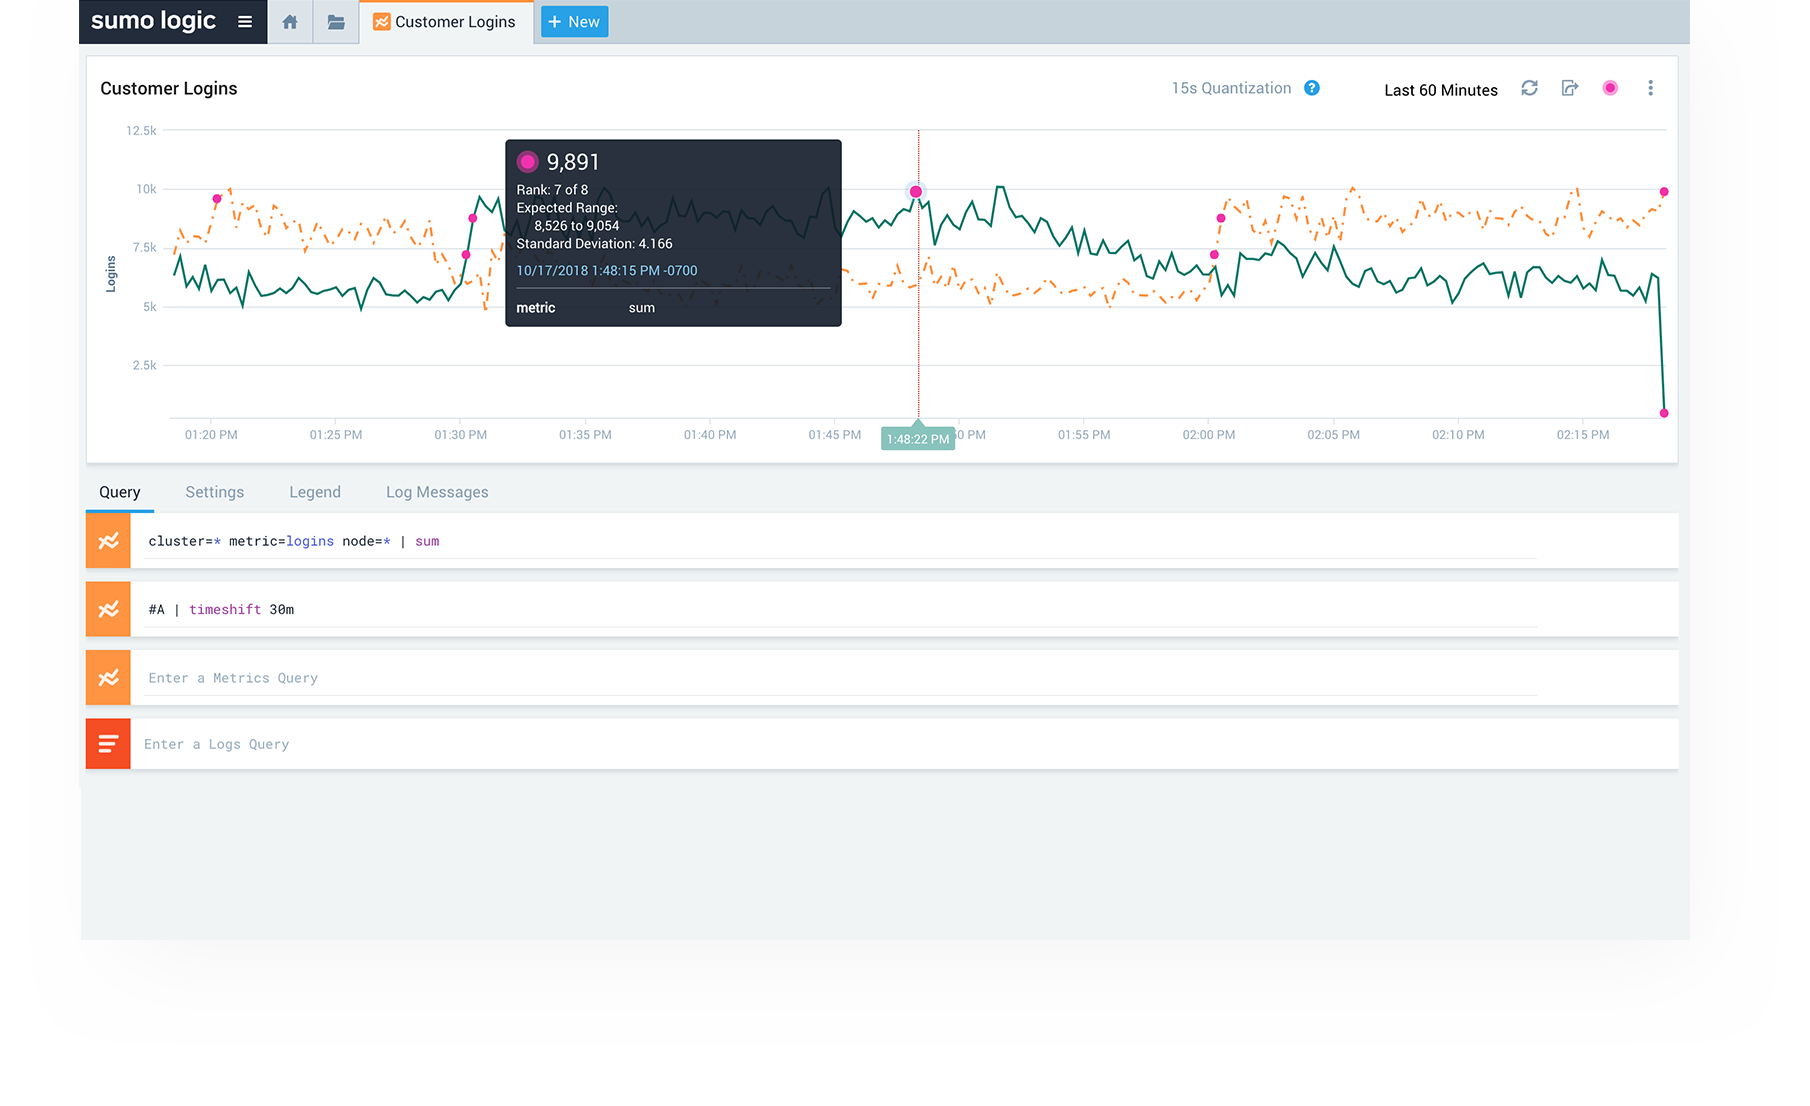 Optimized analytics for logs, metrics, and events